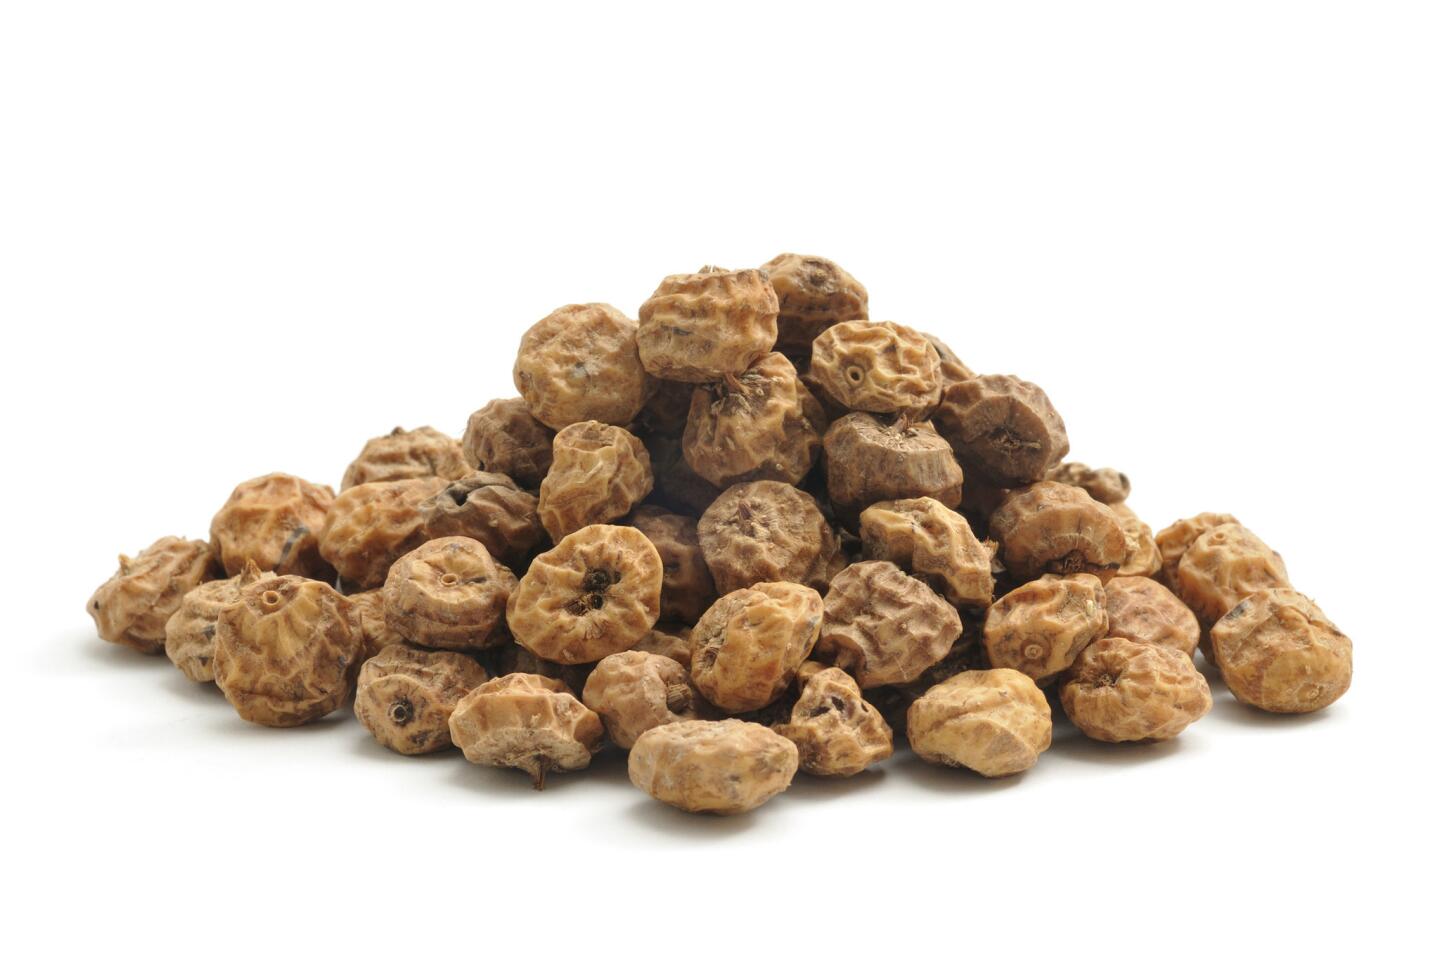 Tiger nuts (or chufa) have been around since prehistoric times. It's found in many parts of the world, including around Valencia, Spain, where it's put into cold horchata.